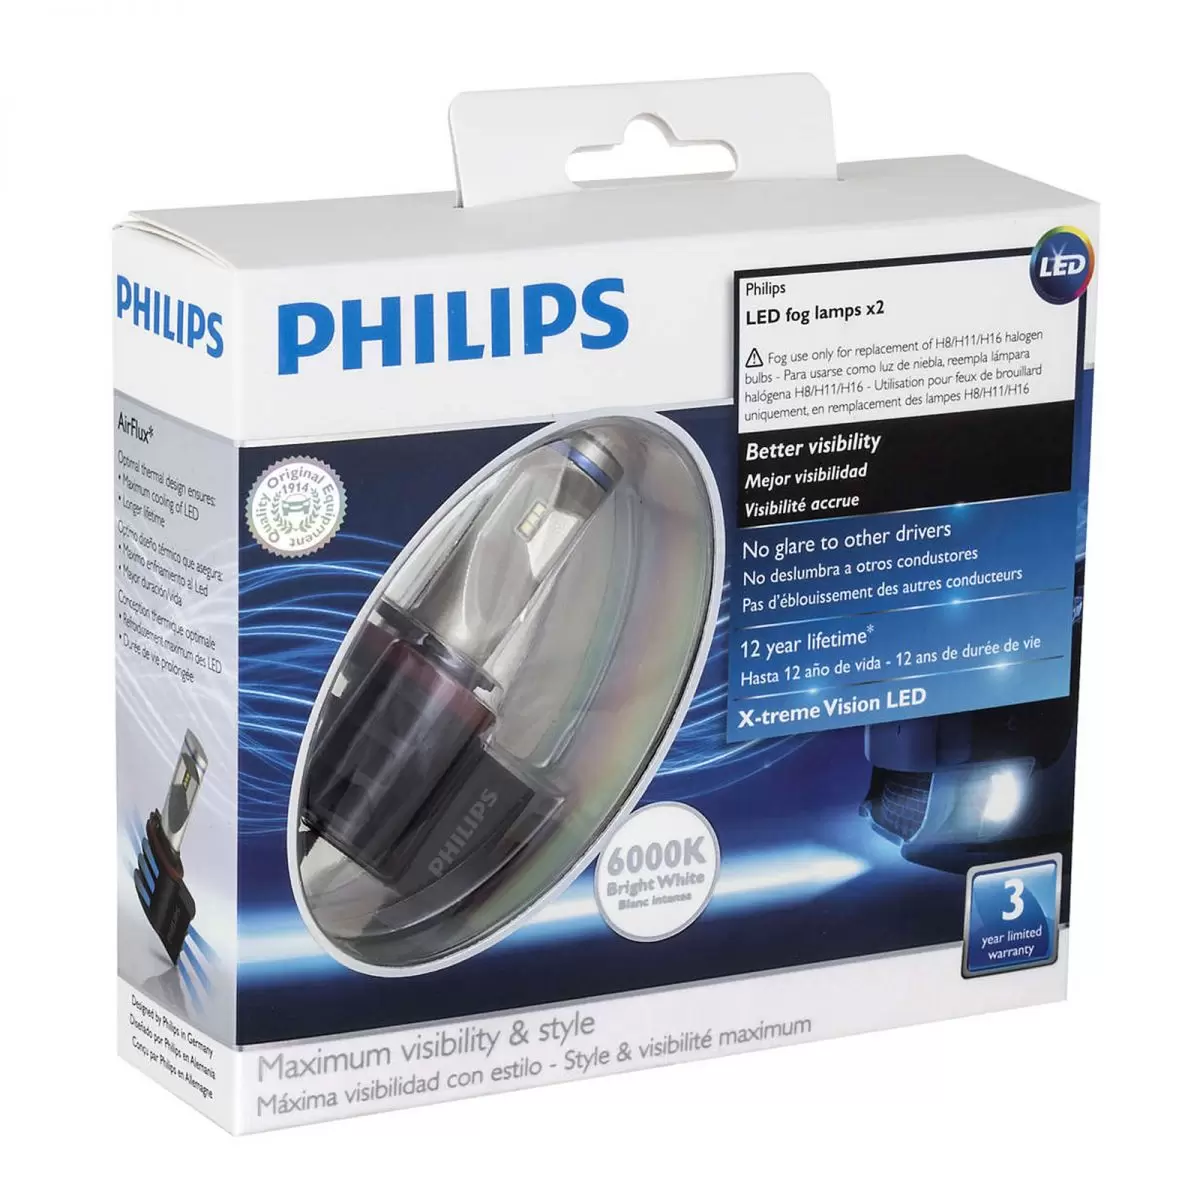 Philips X-treme Vision LED Fog Lamps Information & Review